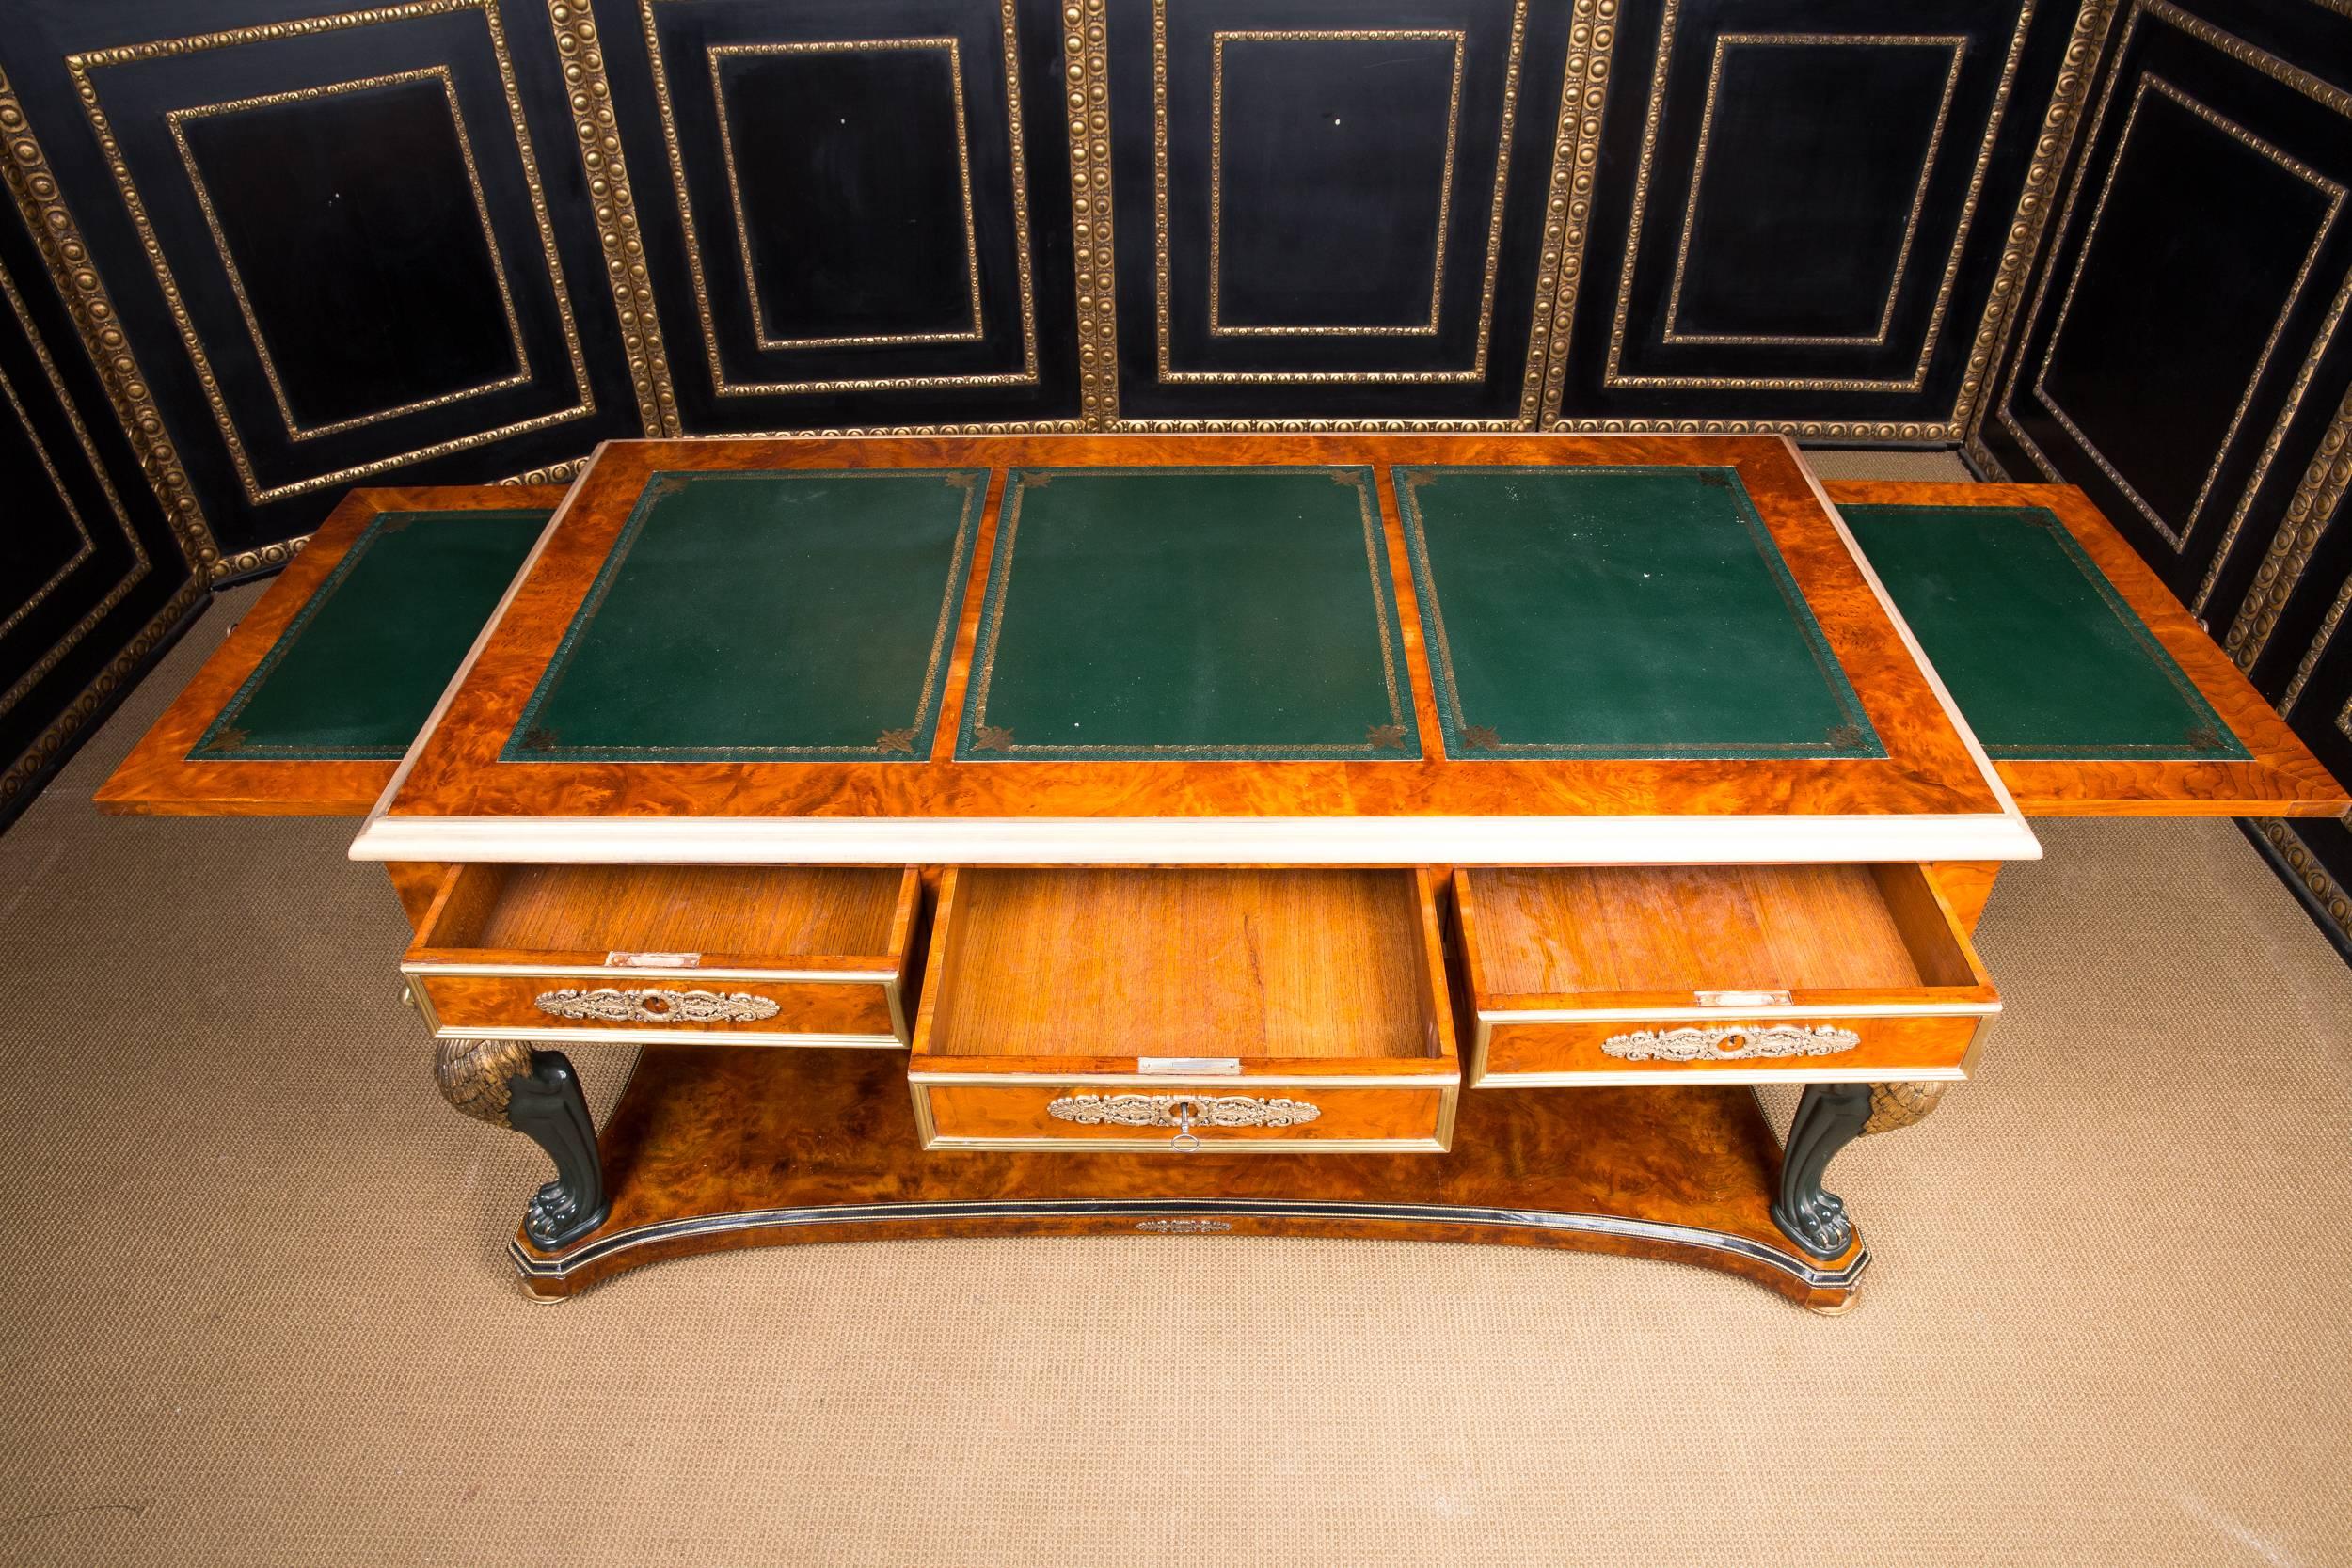 20th Century, French Desk or Bureau Plat with Lions in the Empire Style 3